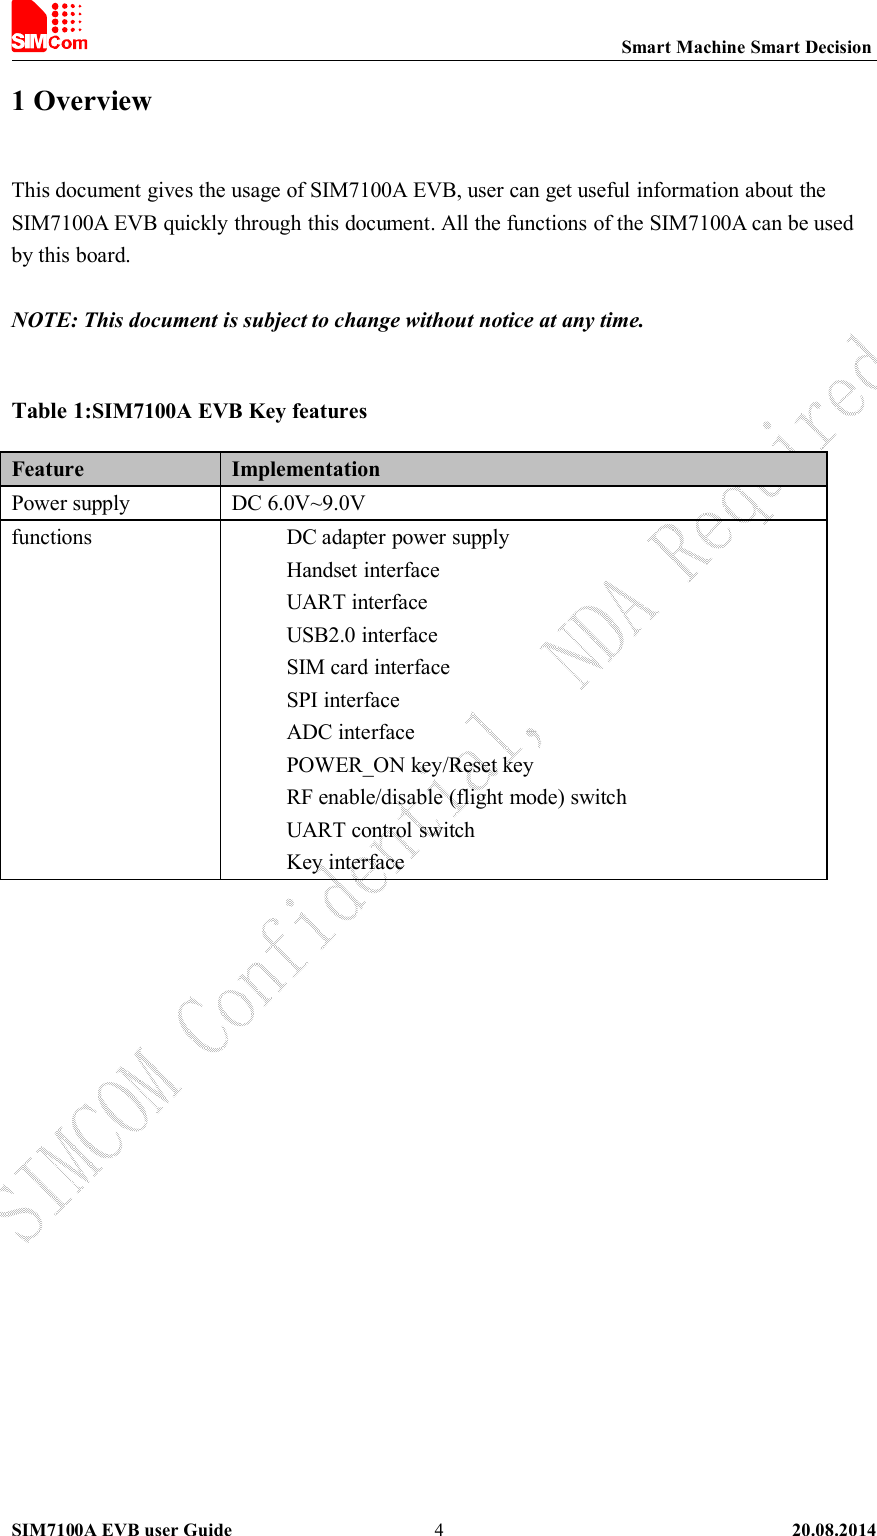 Smart Machine Smart DecisionSIM7100A EVB user Guide 20.08.201441 OverviewThis document gives the usage of SIM7100A EVB, user can get useful information about theSIM7100A EVB quickly through this document. All the functions of the SIM7100A can be usedby this board.NOTE: This document is subject to change without notice at any time.Table 1:SIM7100A EVB Key featuresFeature ImplementationPower supply DC 6.0V~9.0Vfunctions DC adapter power supplyHandset interfaceUART interfaceUSB2.0 interfaceSIM card interfaceSPI interfaceADC interfacePOWER_ON key/Reset keyRF enable/disable (flight mode) switchUART control switchKey interface